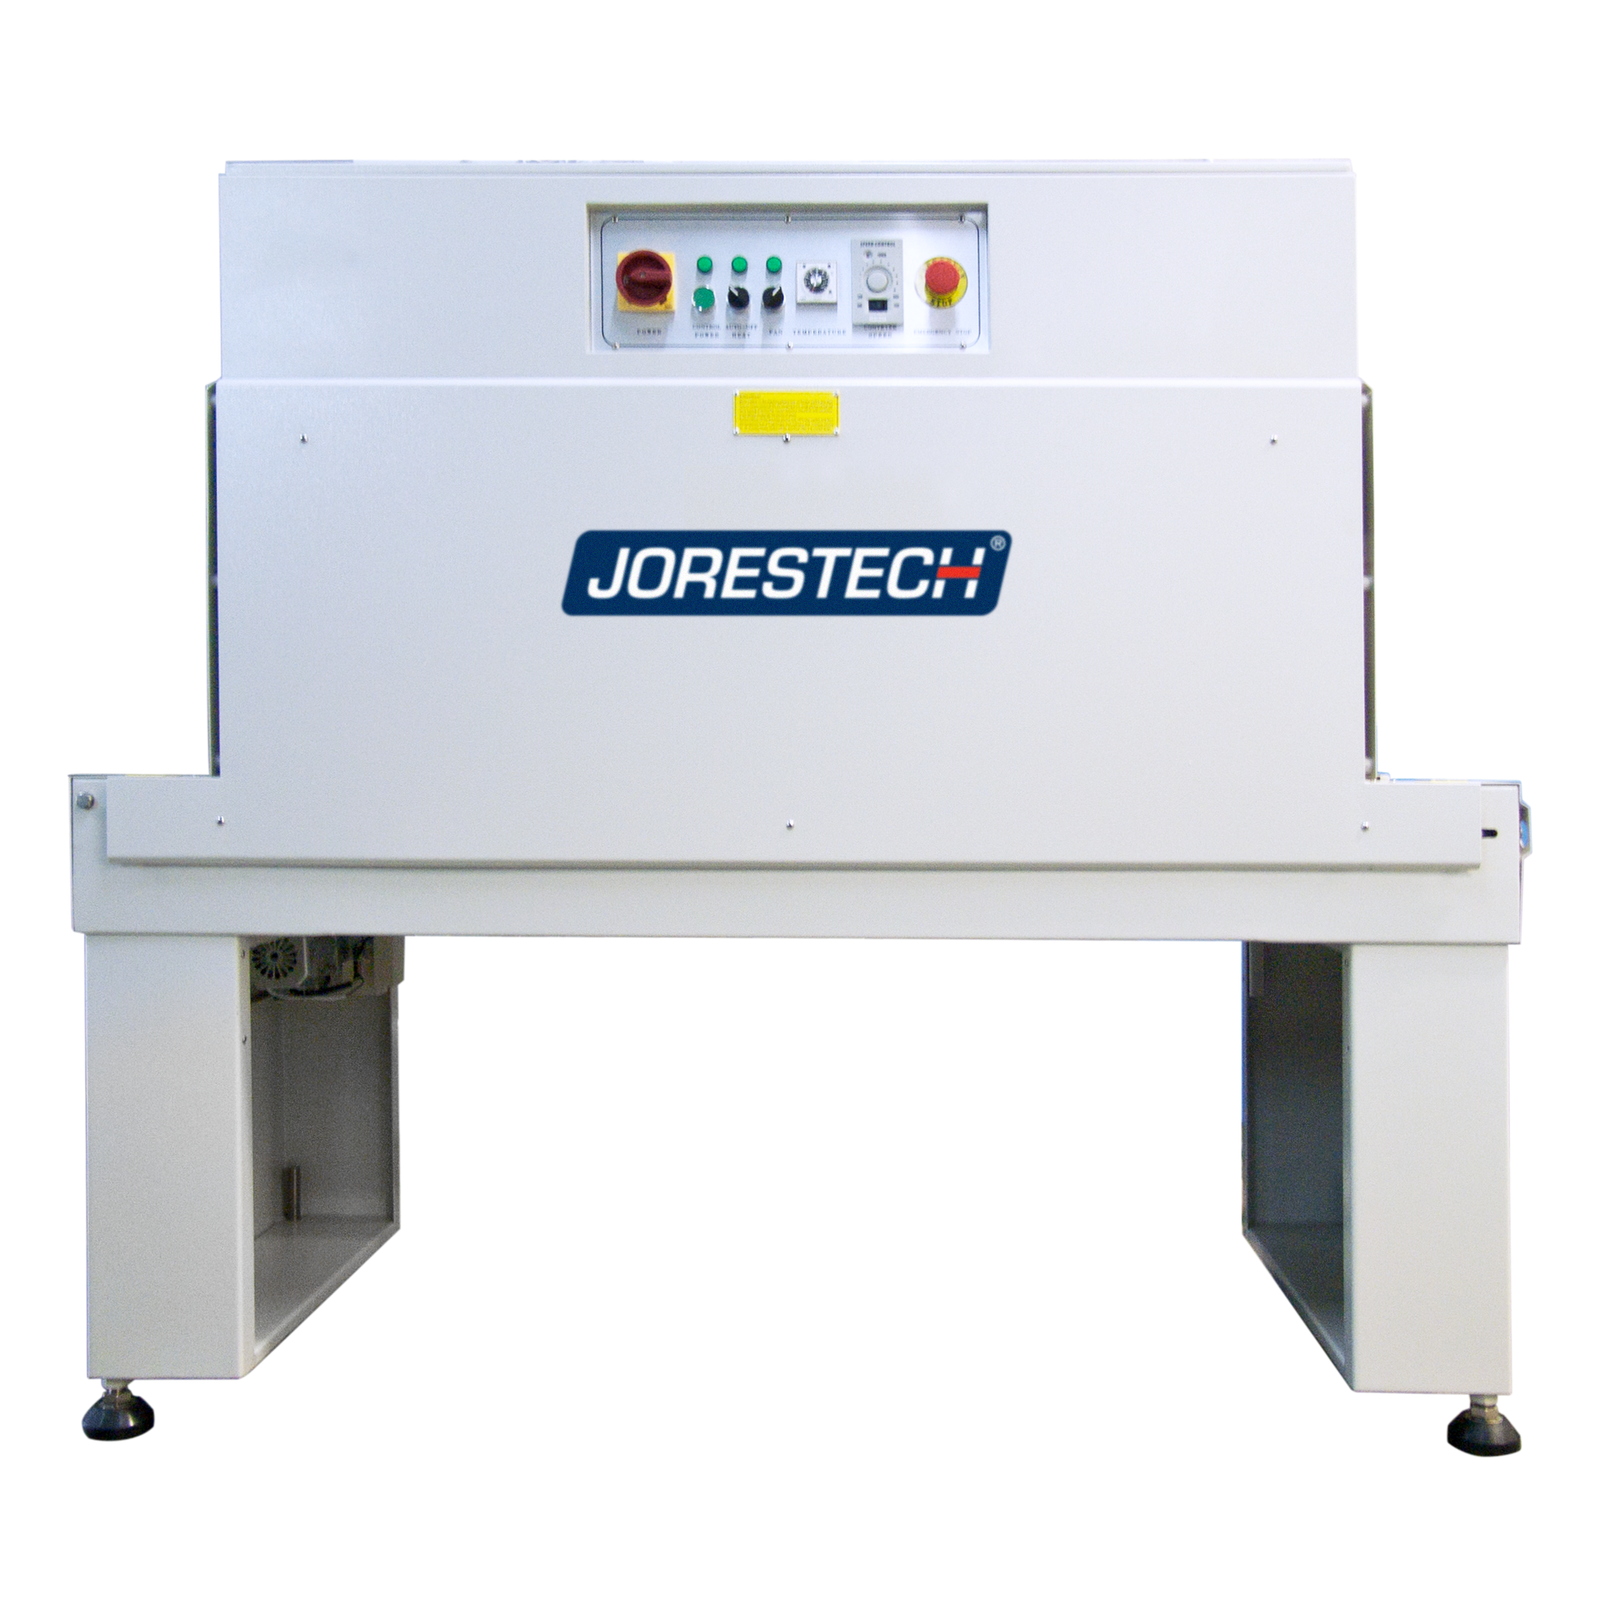 A JORESTECH shrink wrapping heat tunnel machine powder coated in light gray color paint